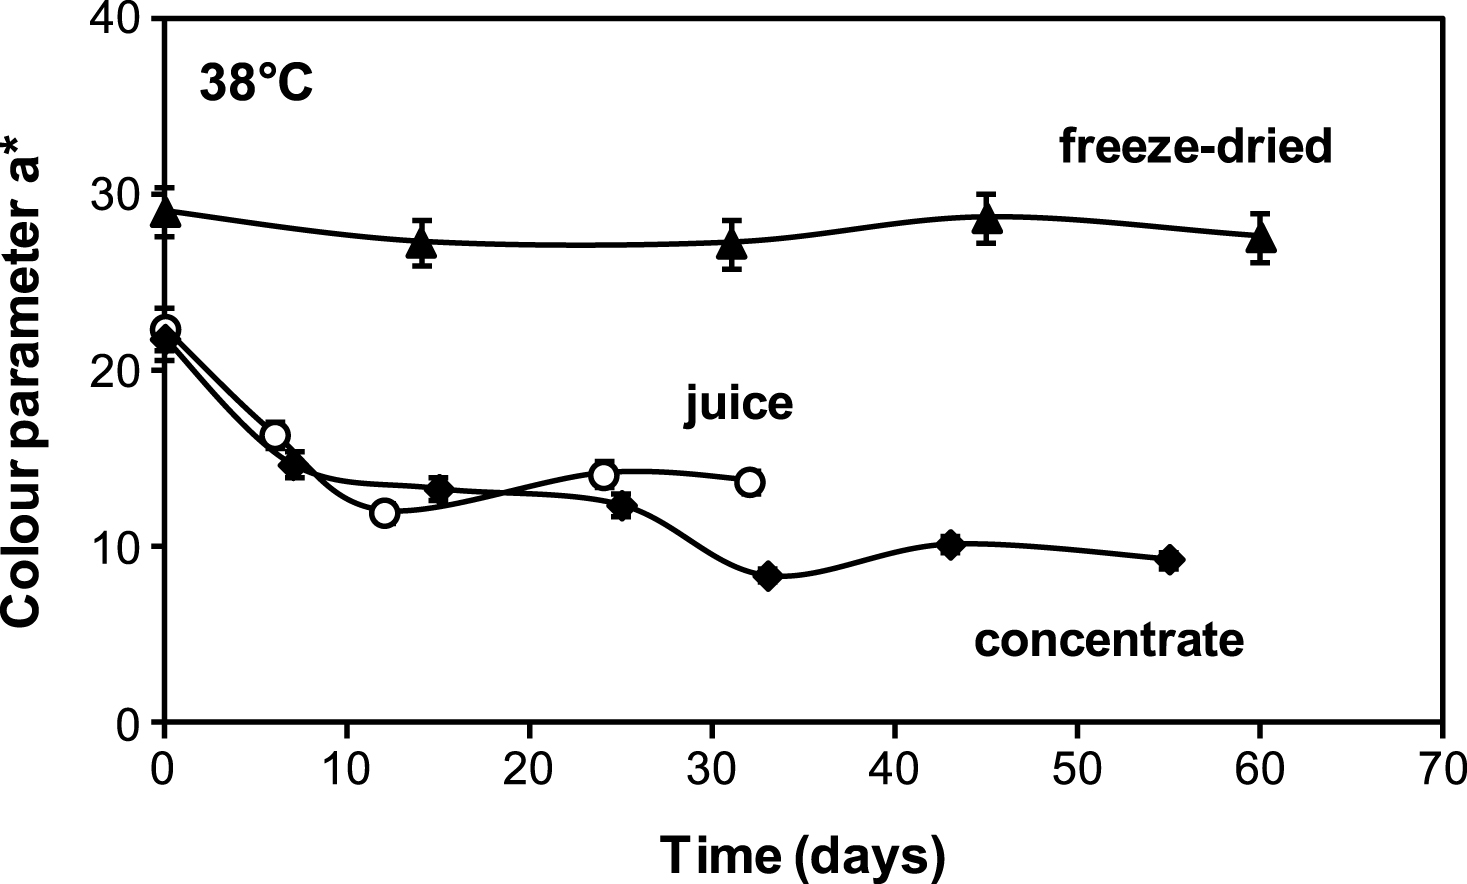 Comparison of a* (redness) colour parameter of: ▴ freeze dried encapsulated (aw = 0.10), ♦ concentrate (61 °Brix) and ∘ fresh(18.7 °Brix) cherry juices stored at 38°C.